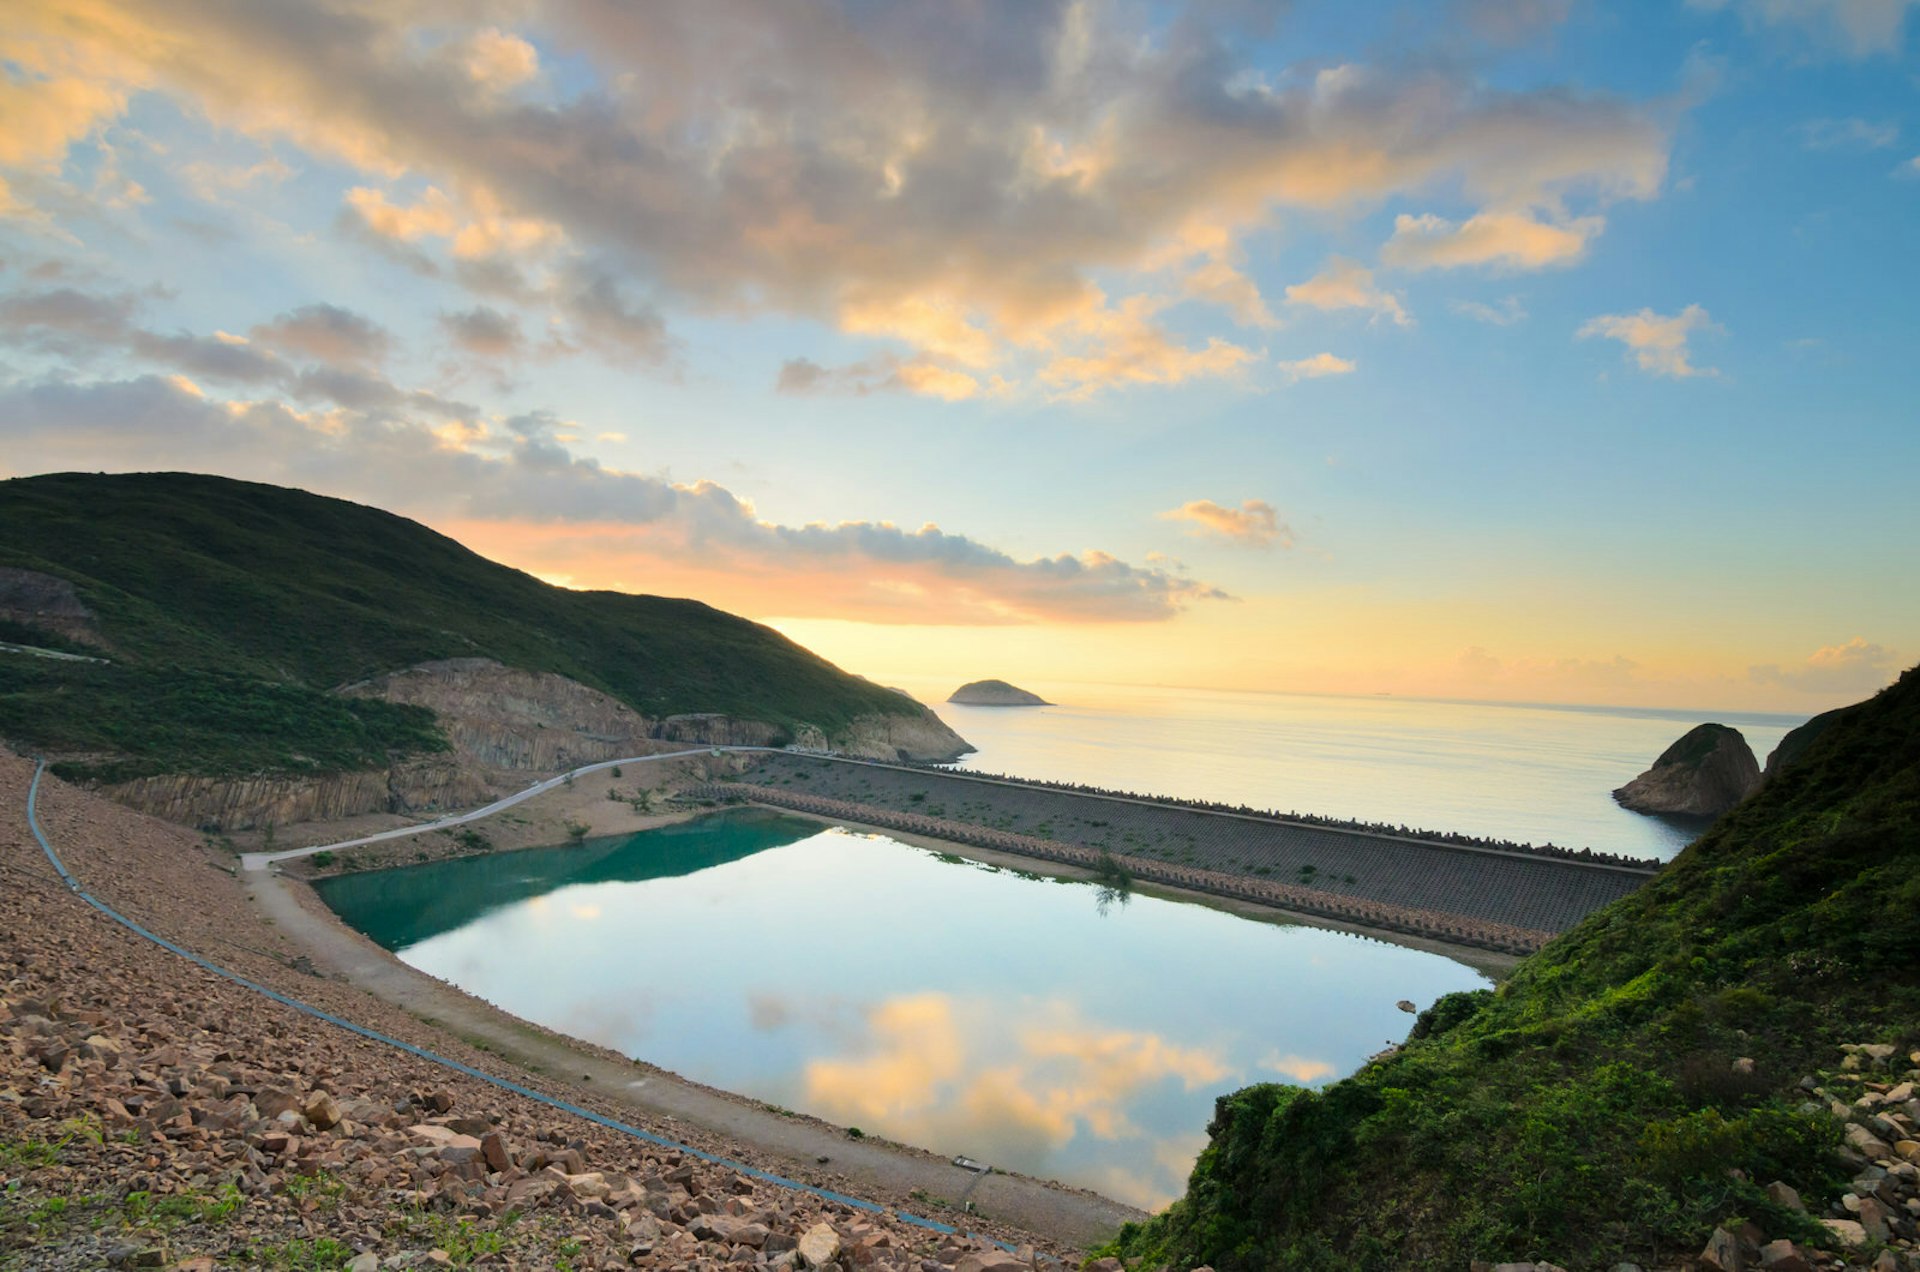 East Dam of High Island Reservoir, beautiful colonial waterworks architecture © omepl1 / Shutterstock